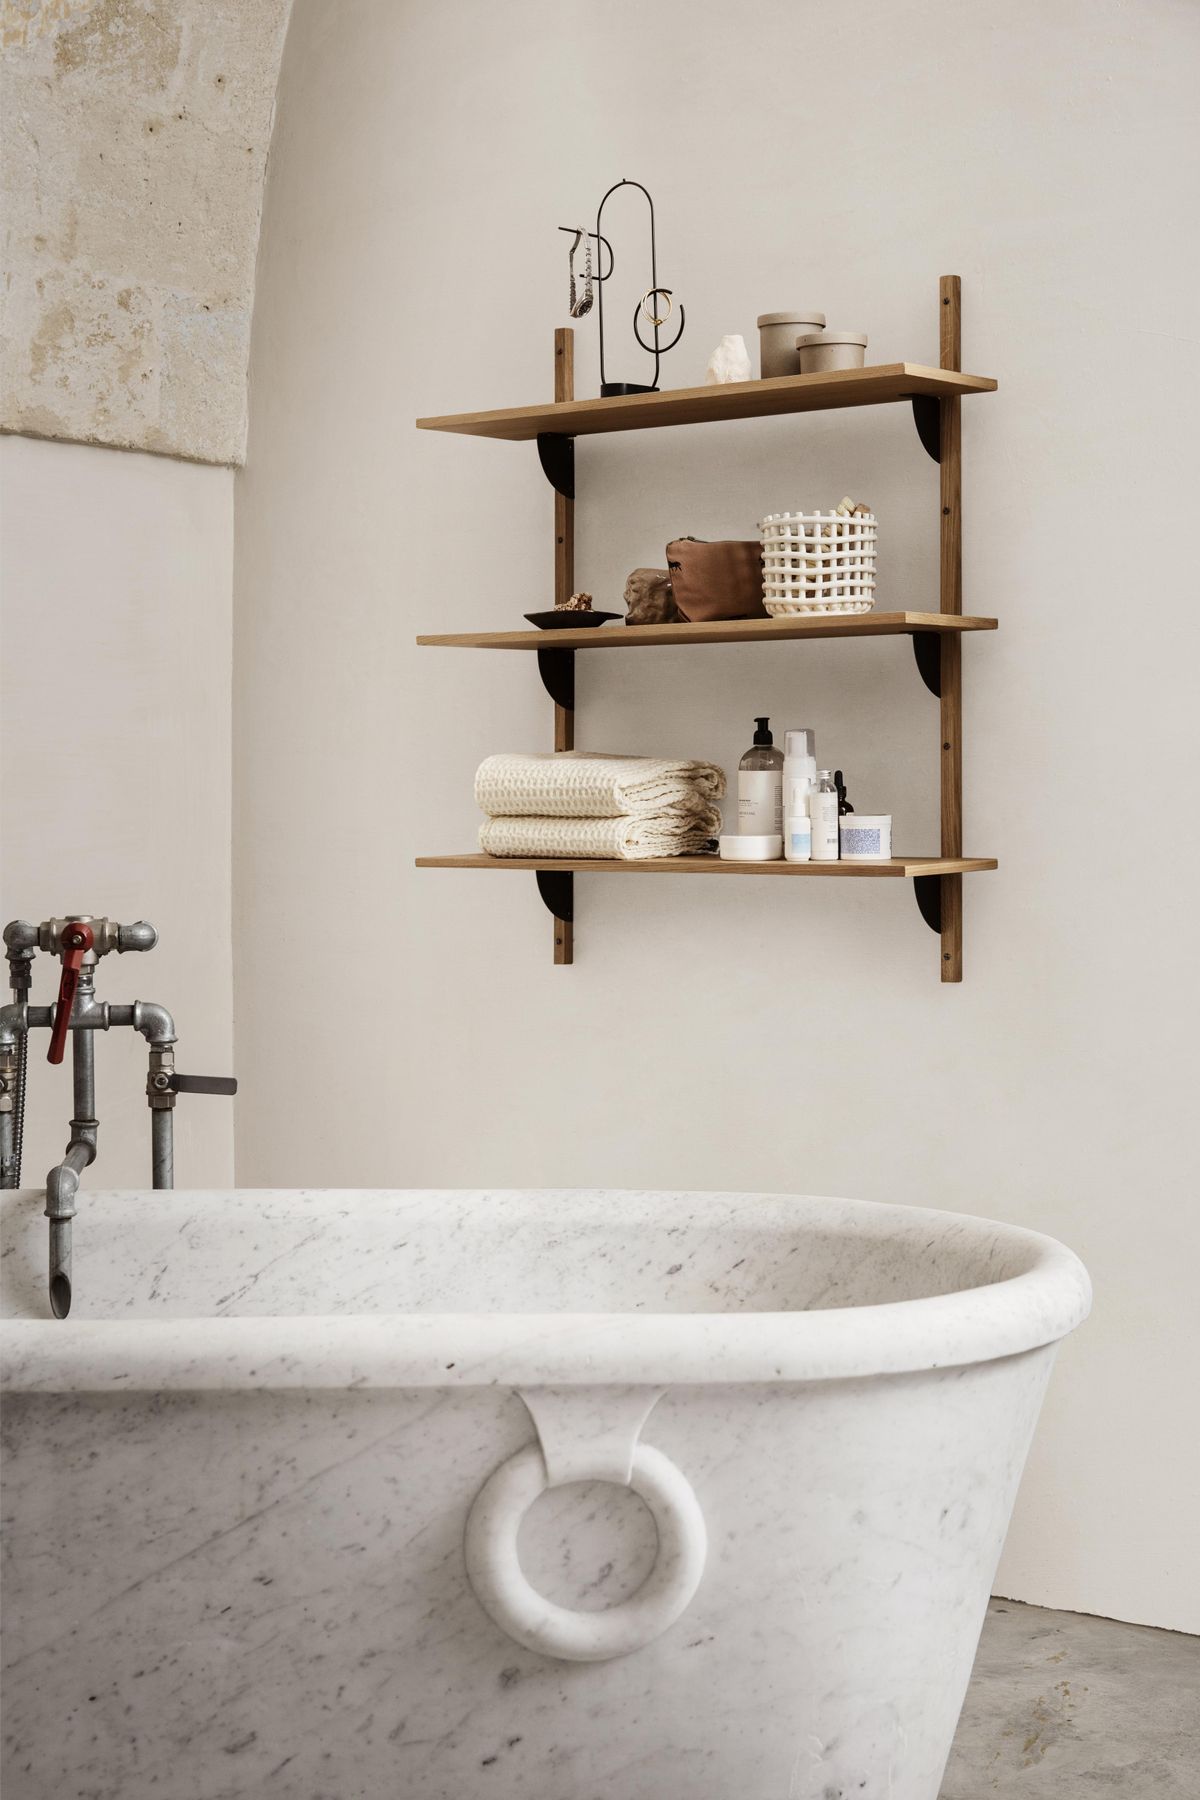 A shelf above the bath at just the right height for books and drinks!